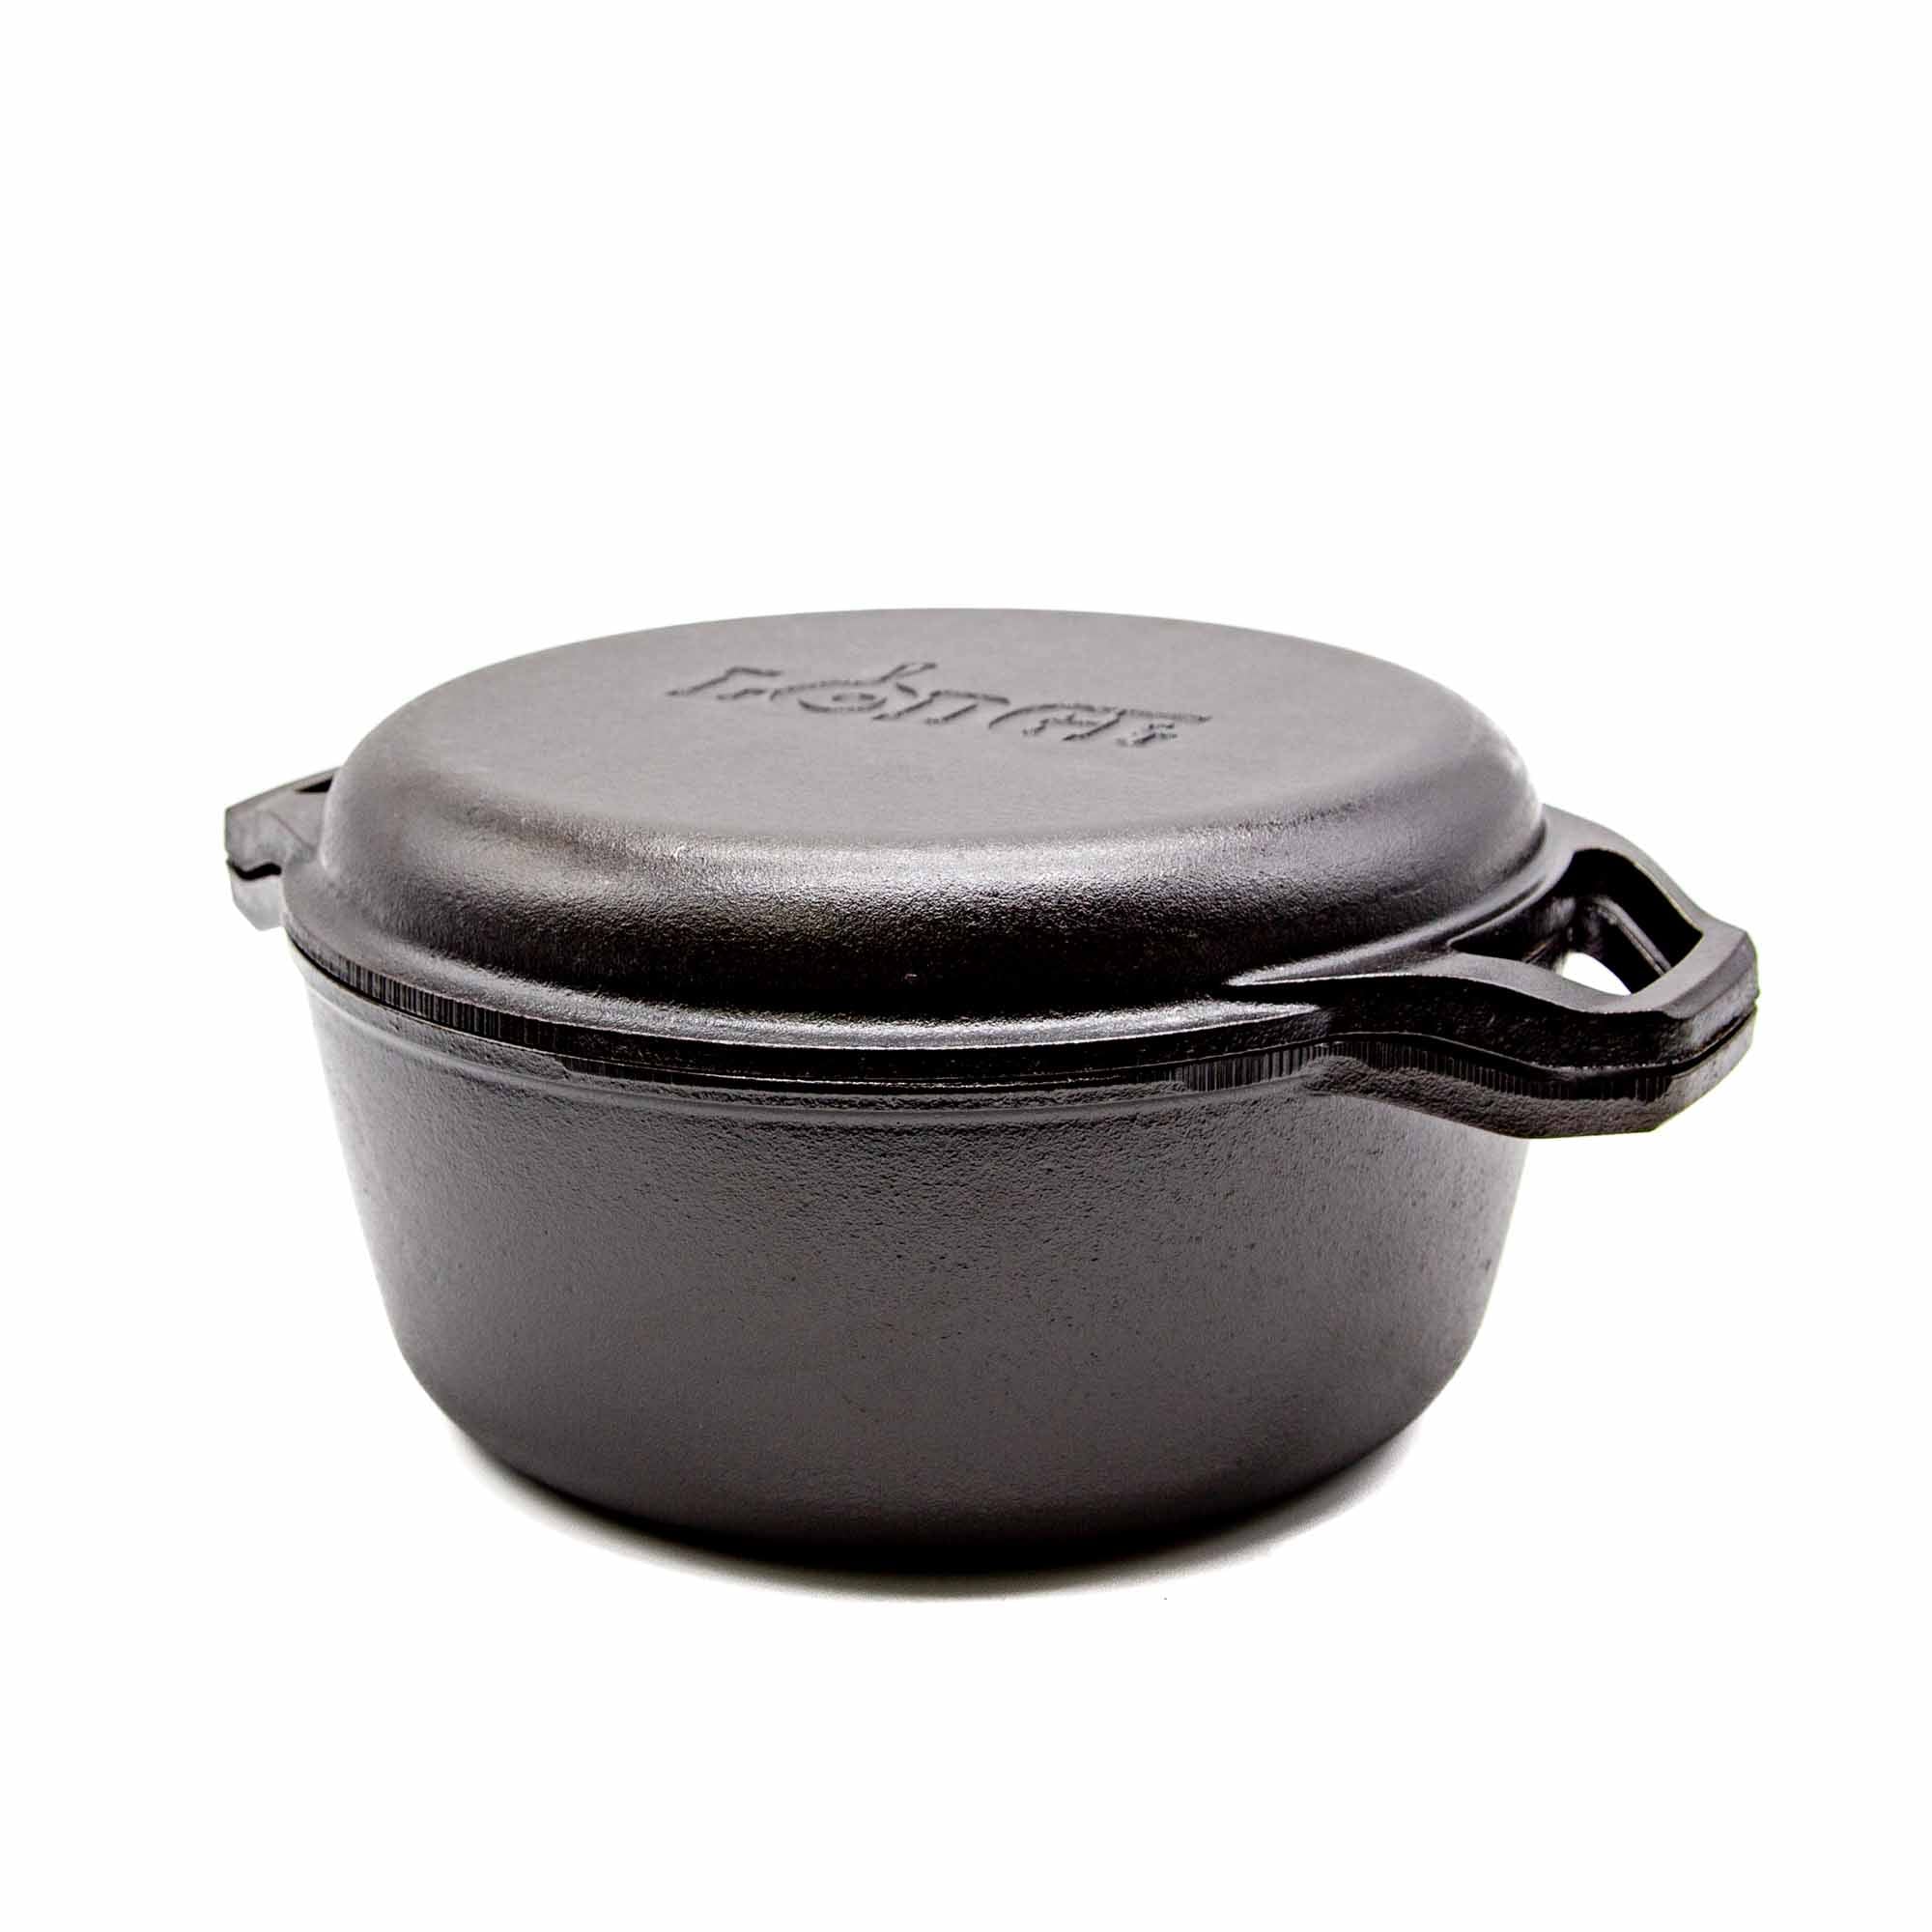 Lodge 6 Quart Double Dutch Oven - Mortise And Tenon